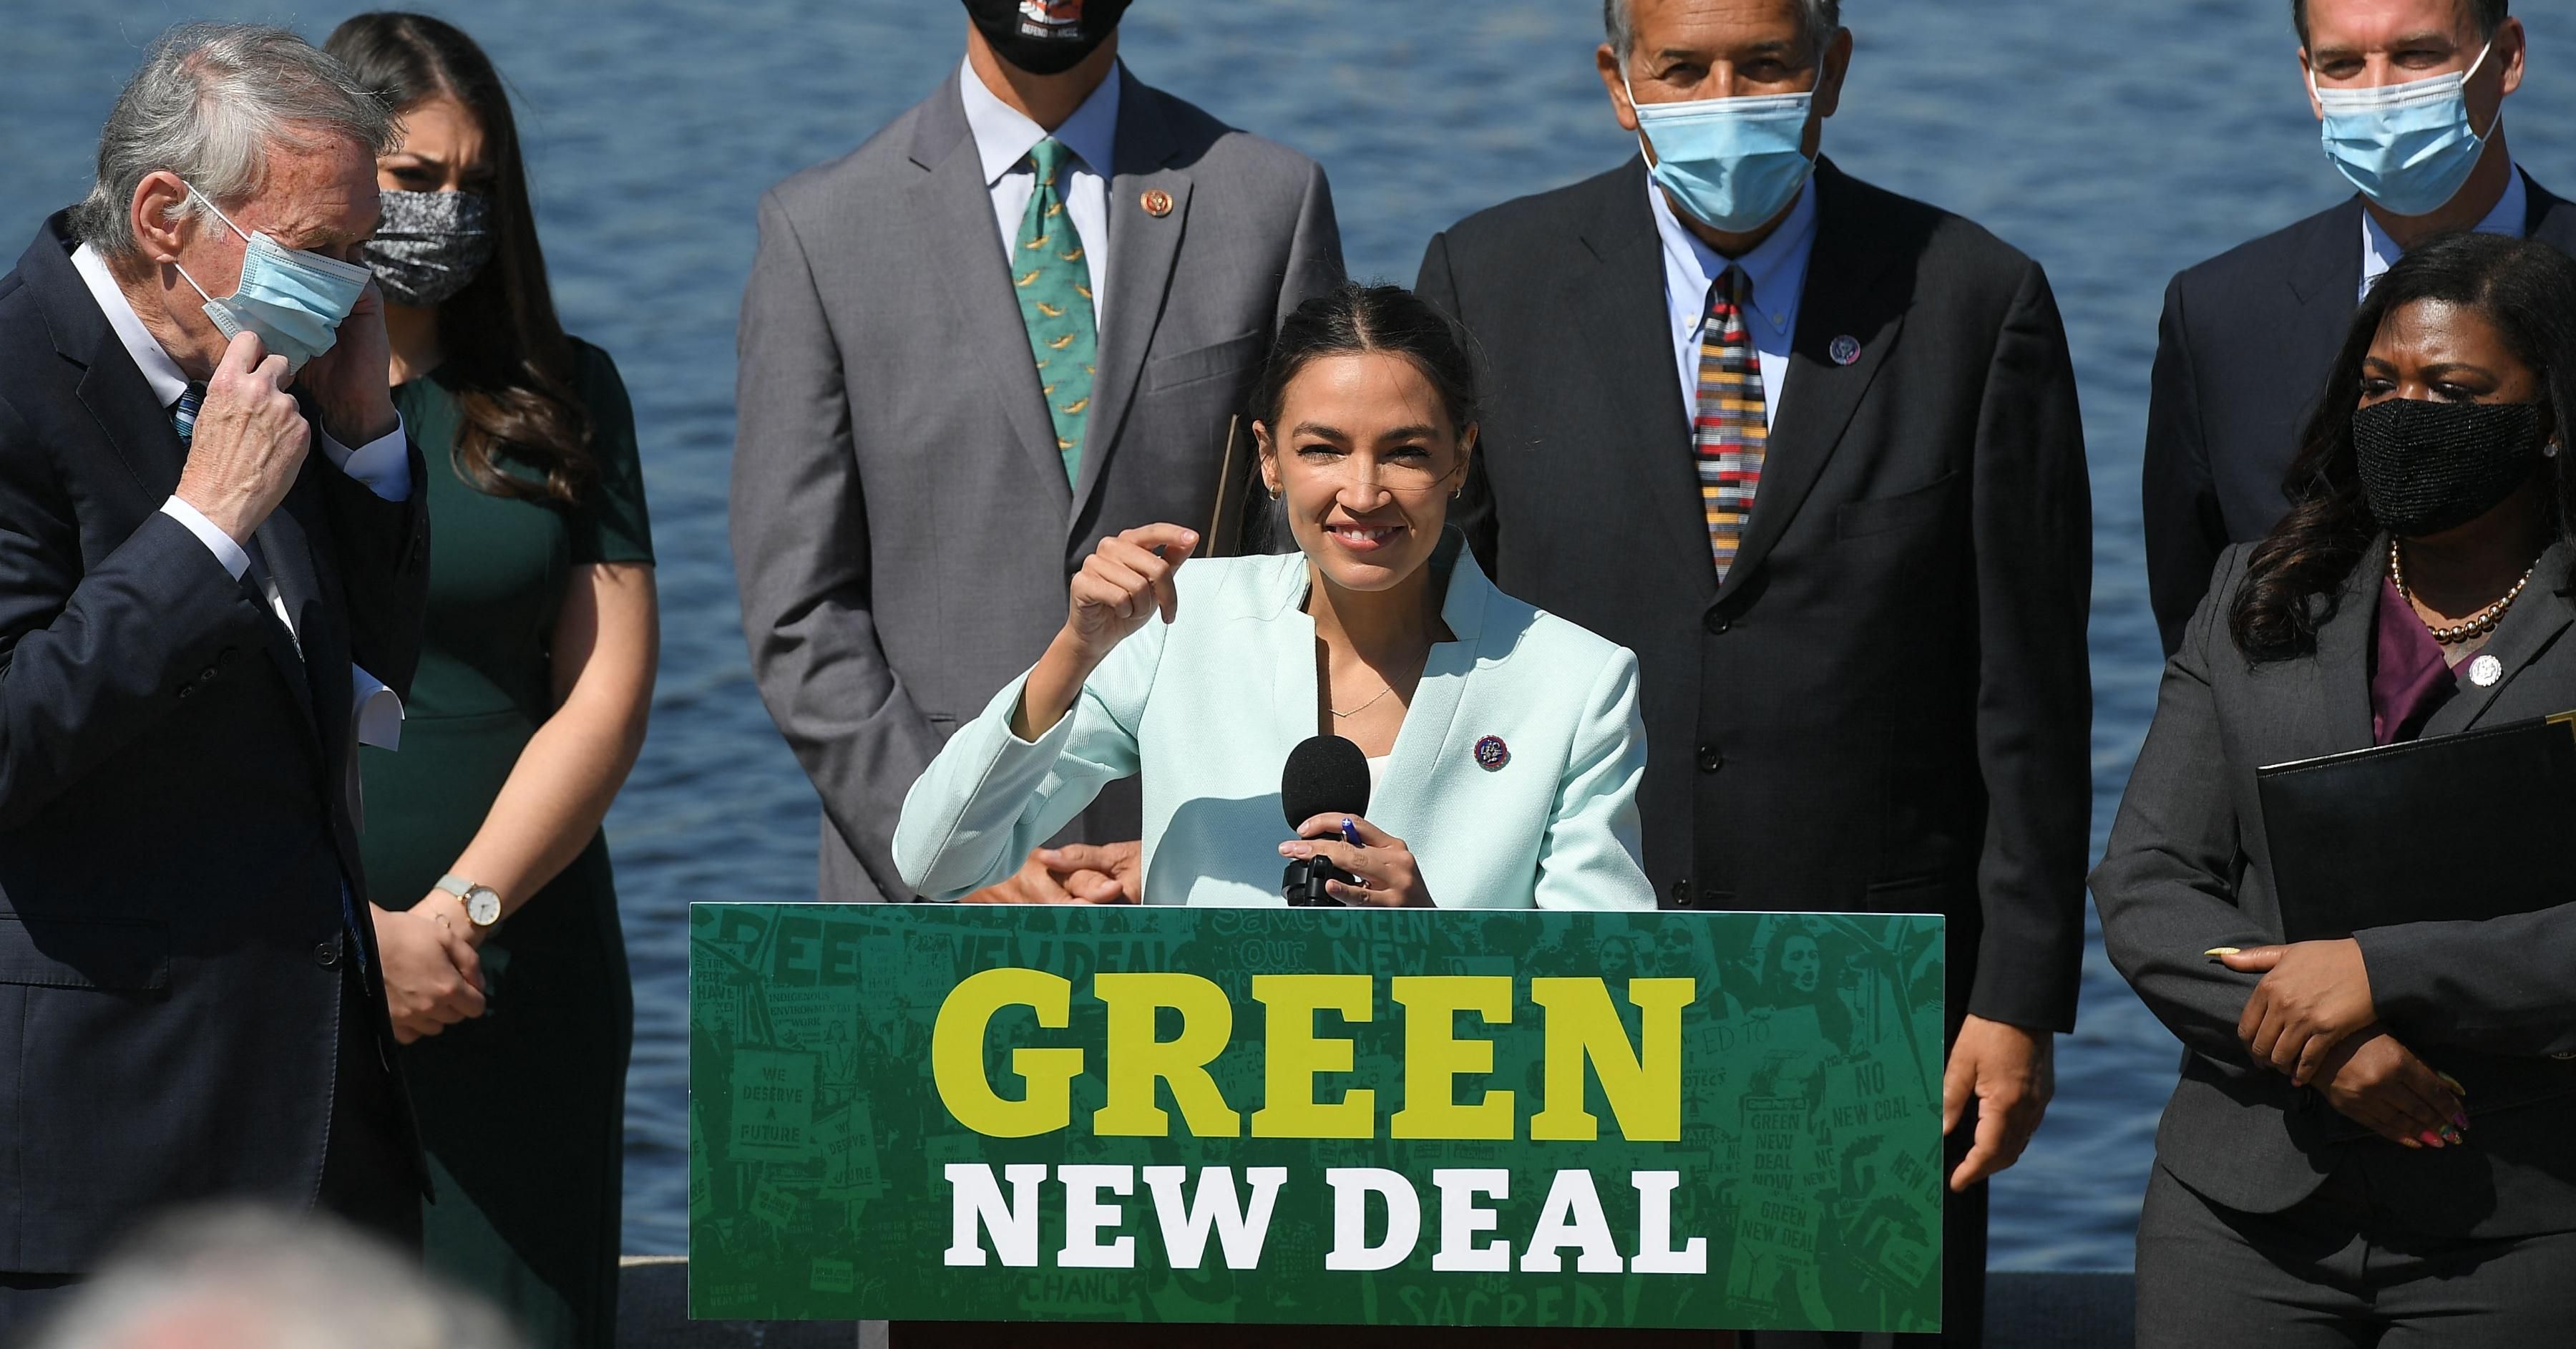 Representative Alexandria Ocasio-Cortez(D-NY) next to Senator Ed Markey, D-MA, speaks during a press conference to re-introduce the Green New Deal in front of the US Capitol in Washington, DC on April 20, 2021. (Photo: MANDEL NGAN/AFP via Getty Images)